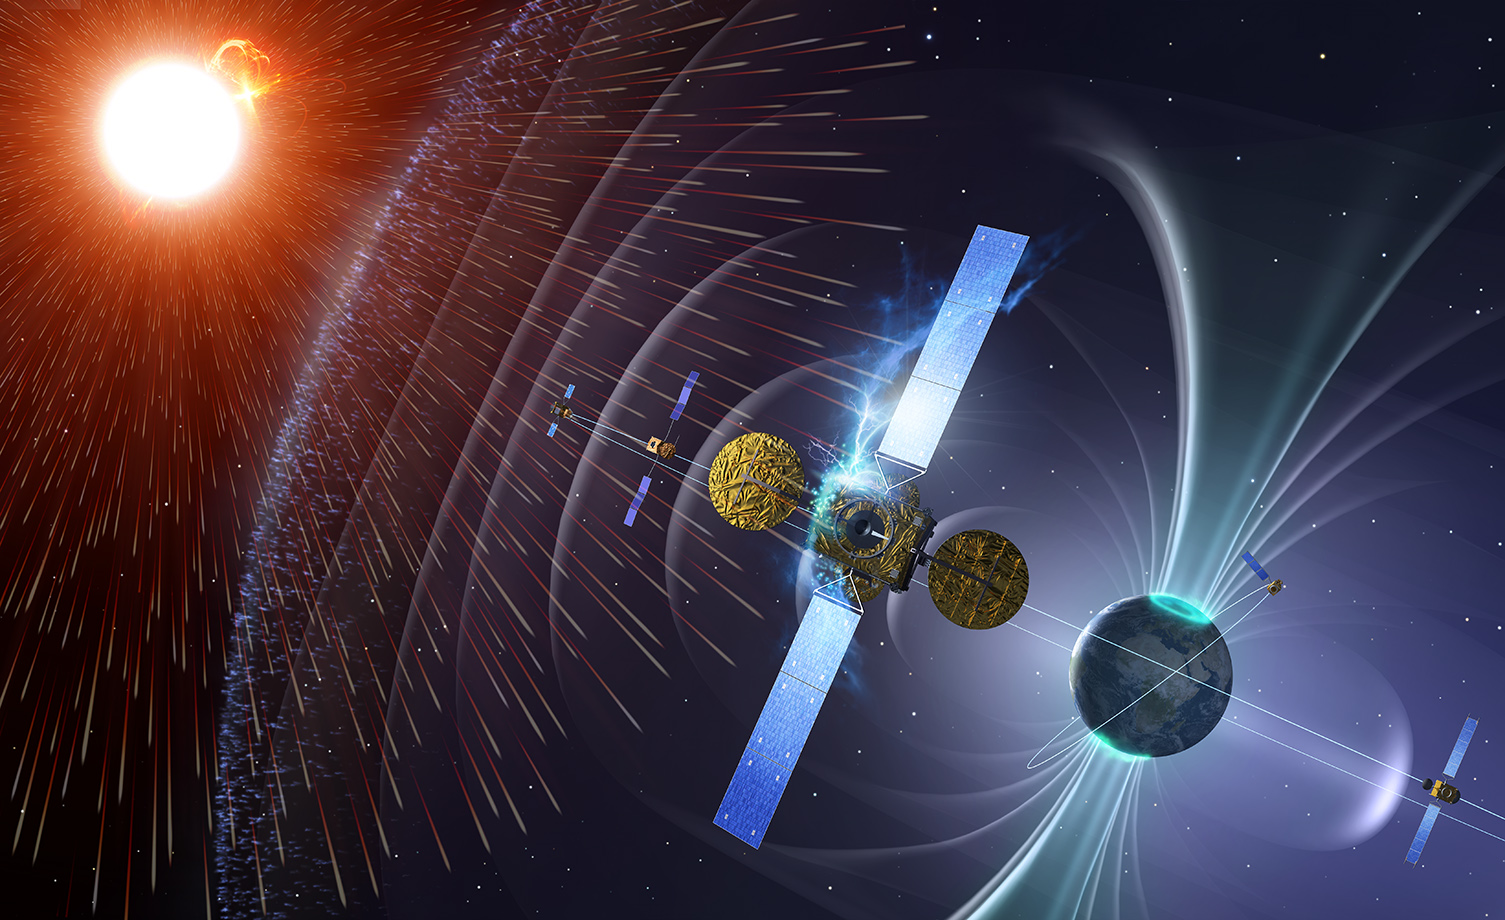 Artist's impression of particles from Sun passing over a satellite, which causes a lightning strike on the satellite